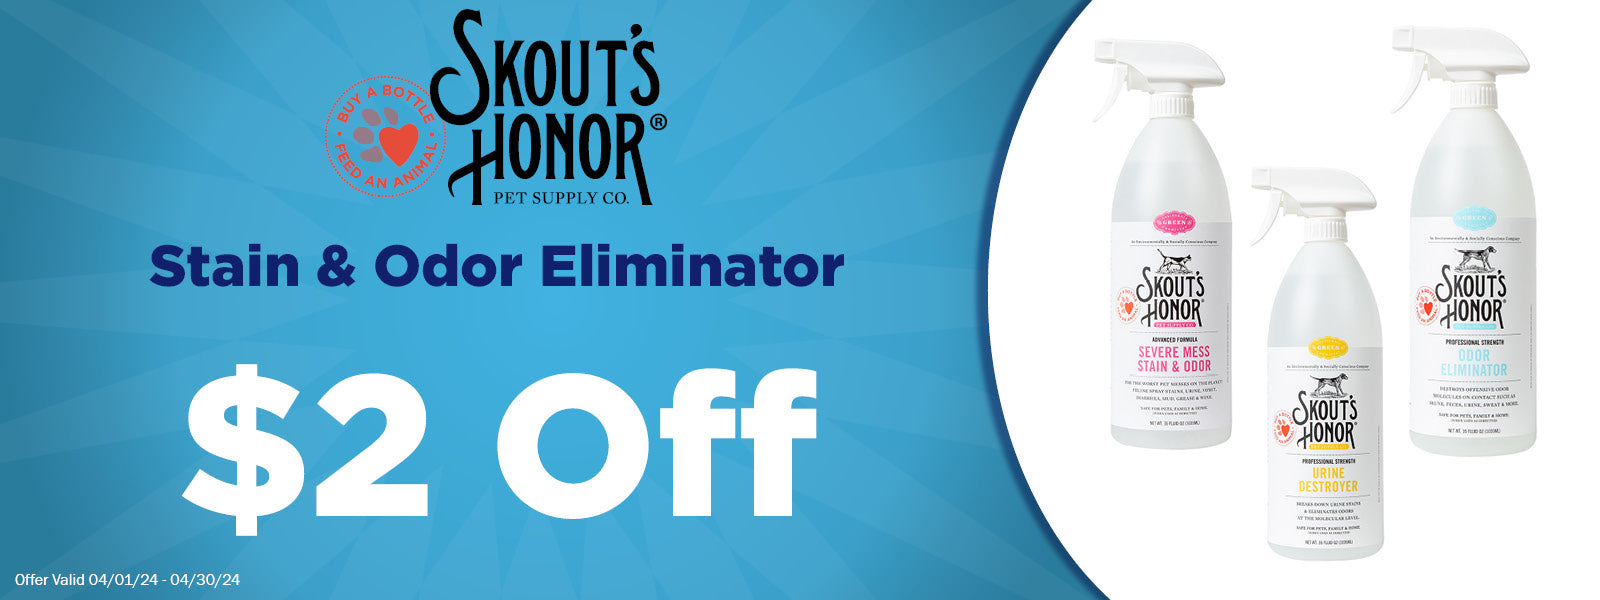 Skouts Honor Stain & Odor $2 Off